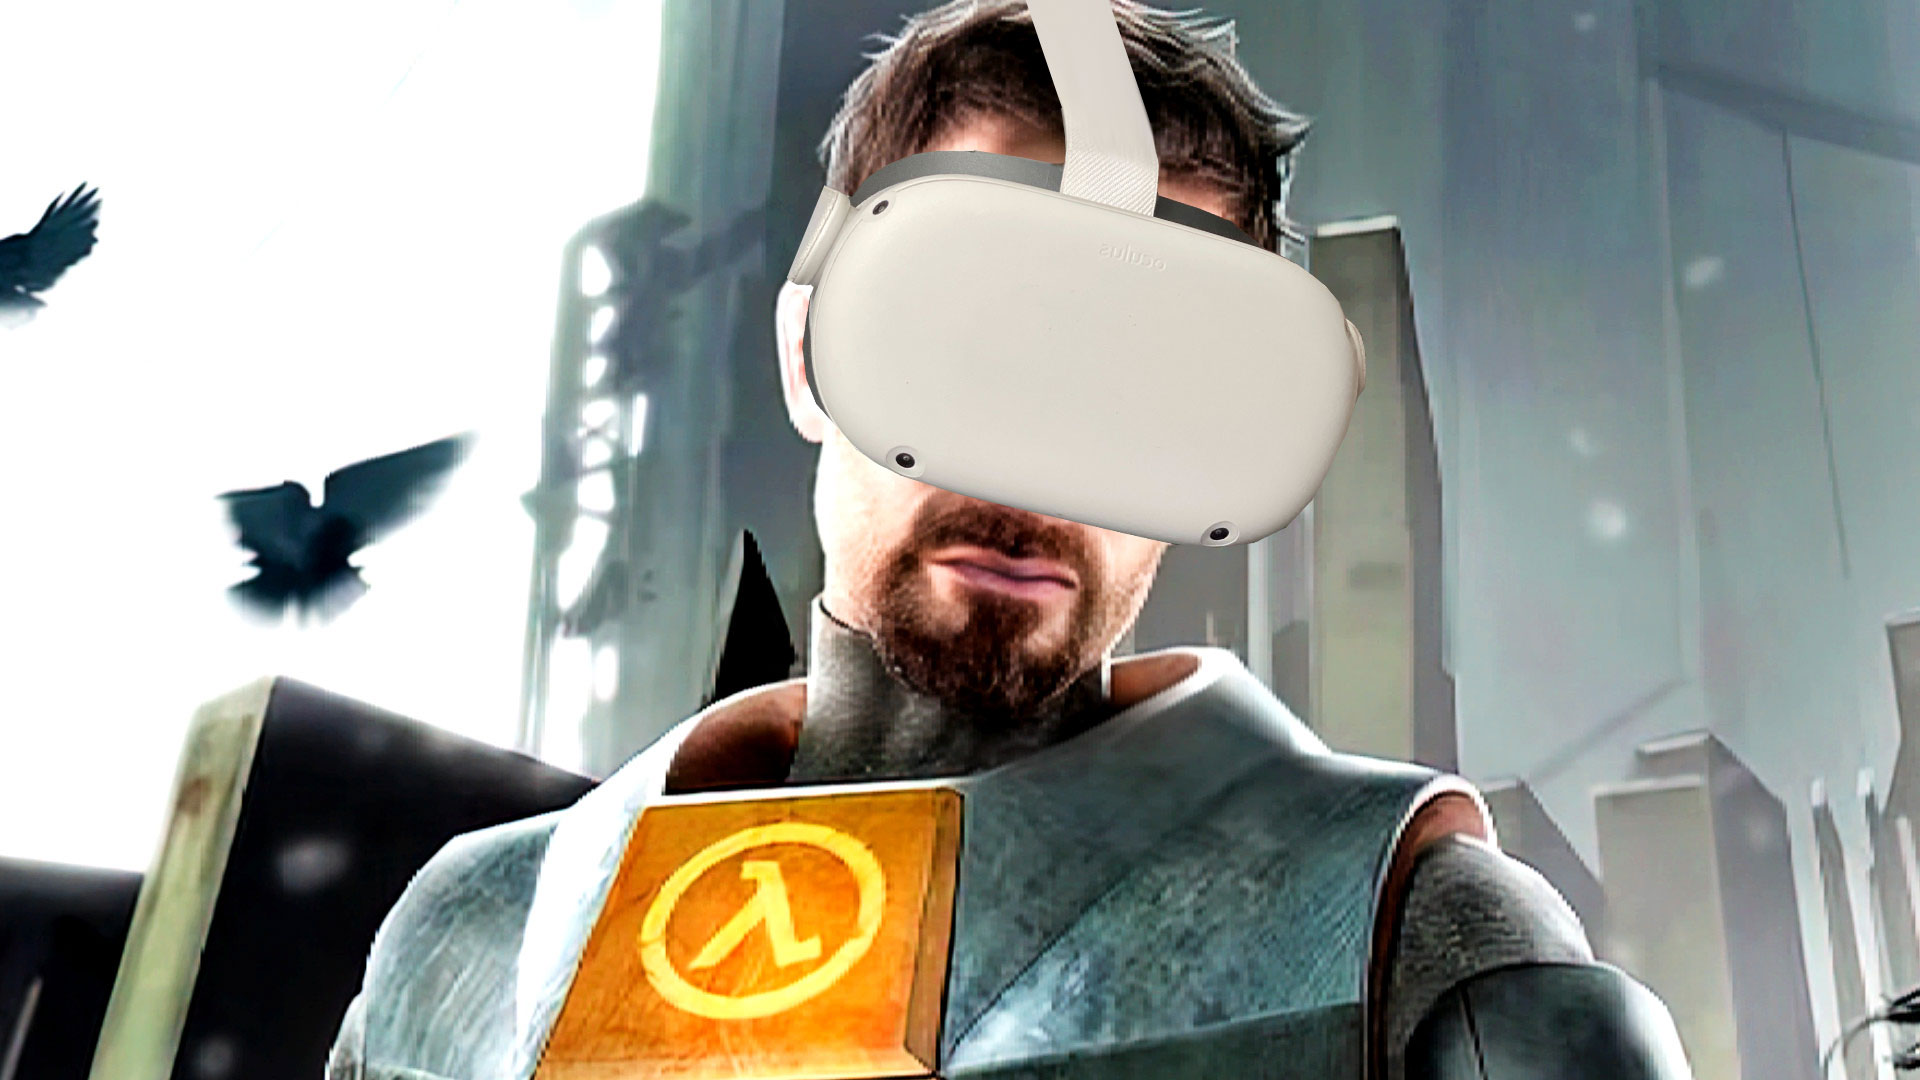 New Half-Life sequel to be VR exclusive, Games